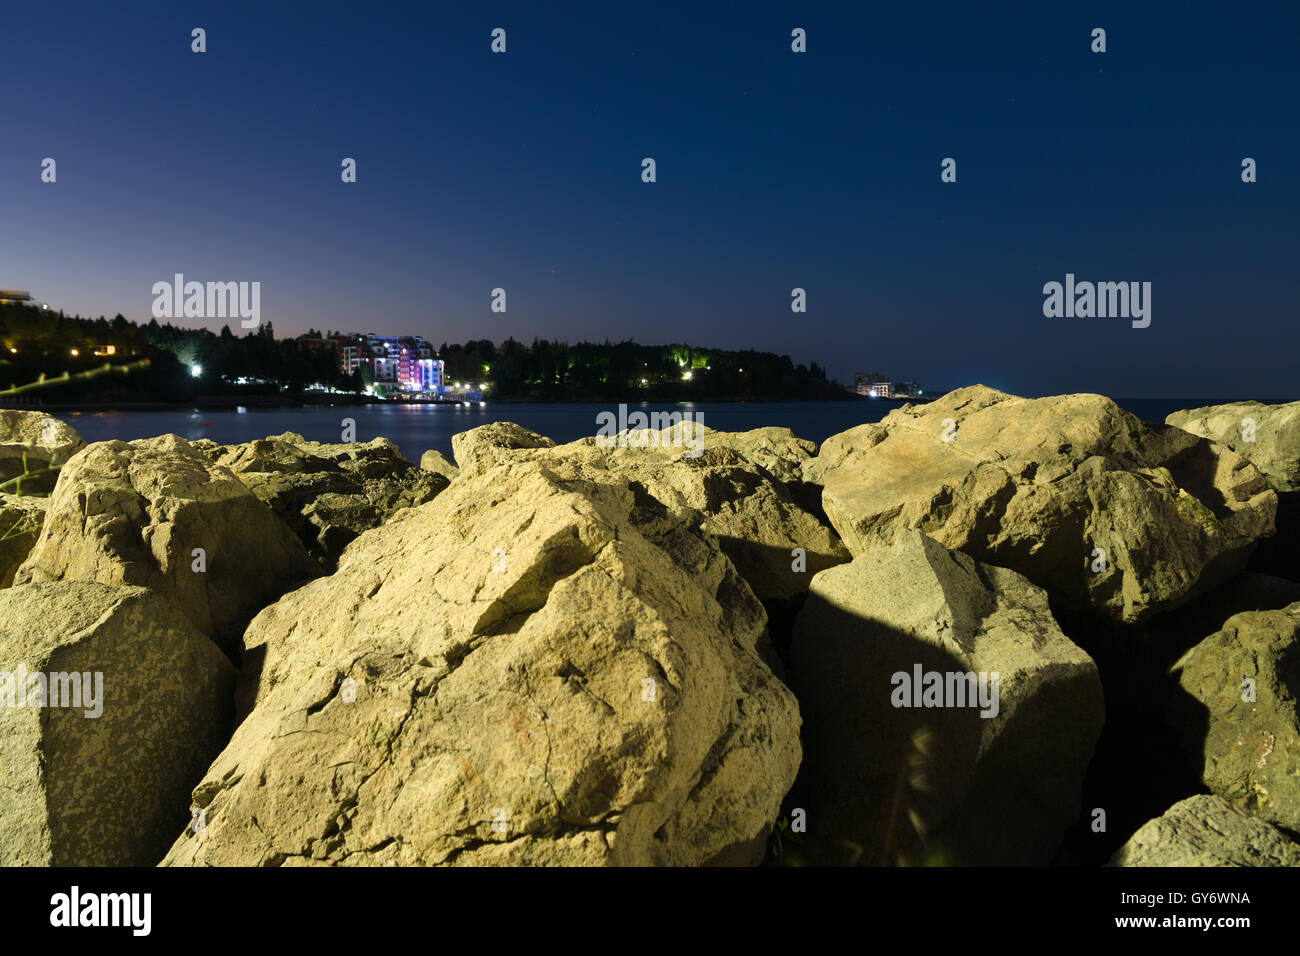 views of the glowing city lights from the shore with rocks Stock Photo